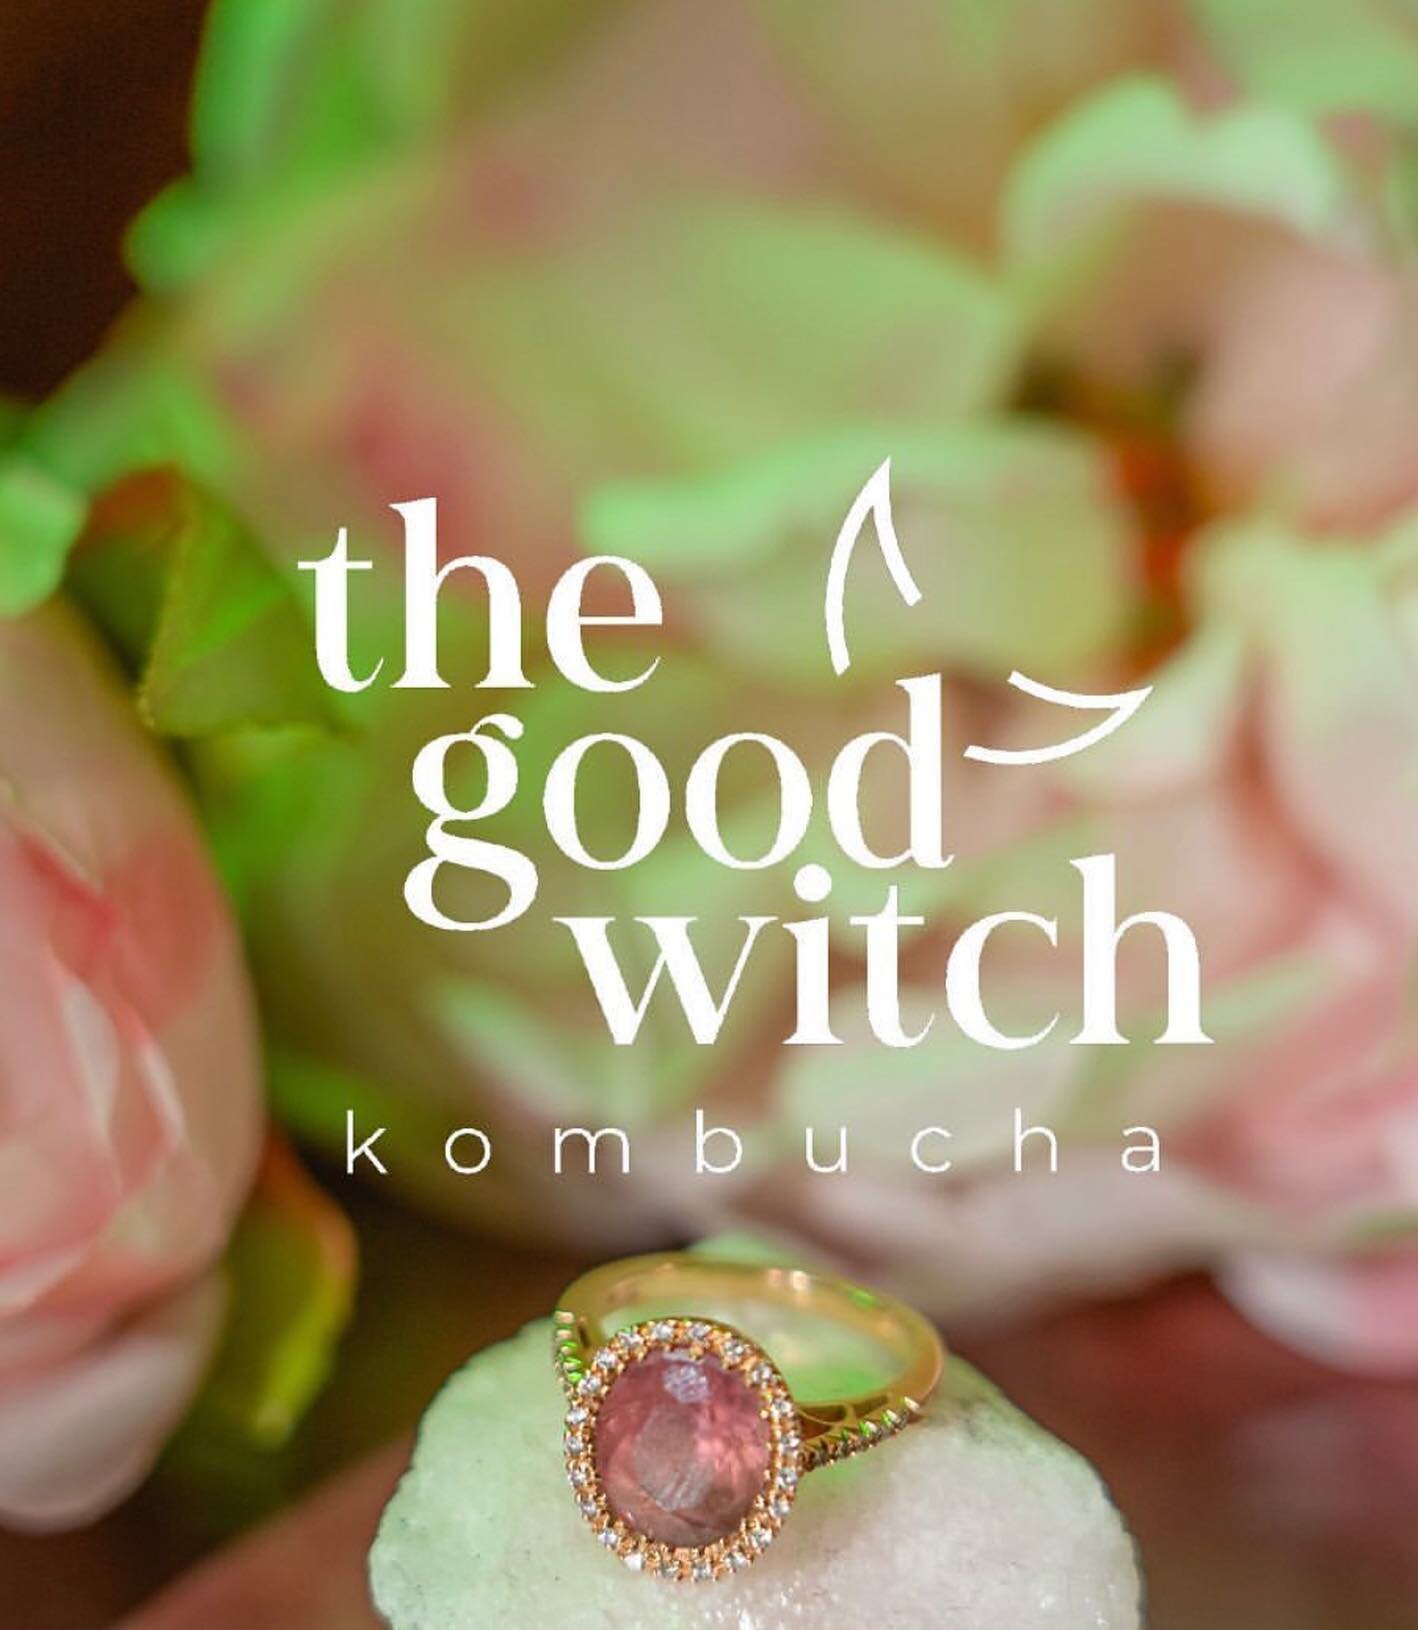 Another beautiful February day! Order through our website for all of your kombucha emergencies&hellip;
Thegoodwitchco.com